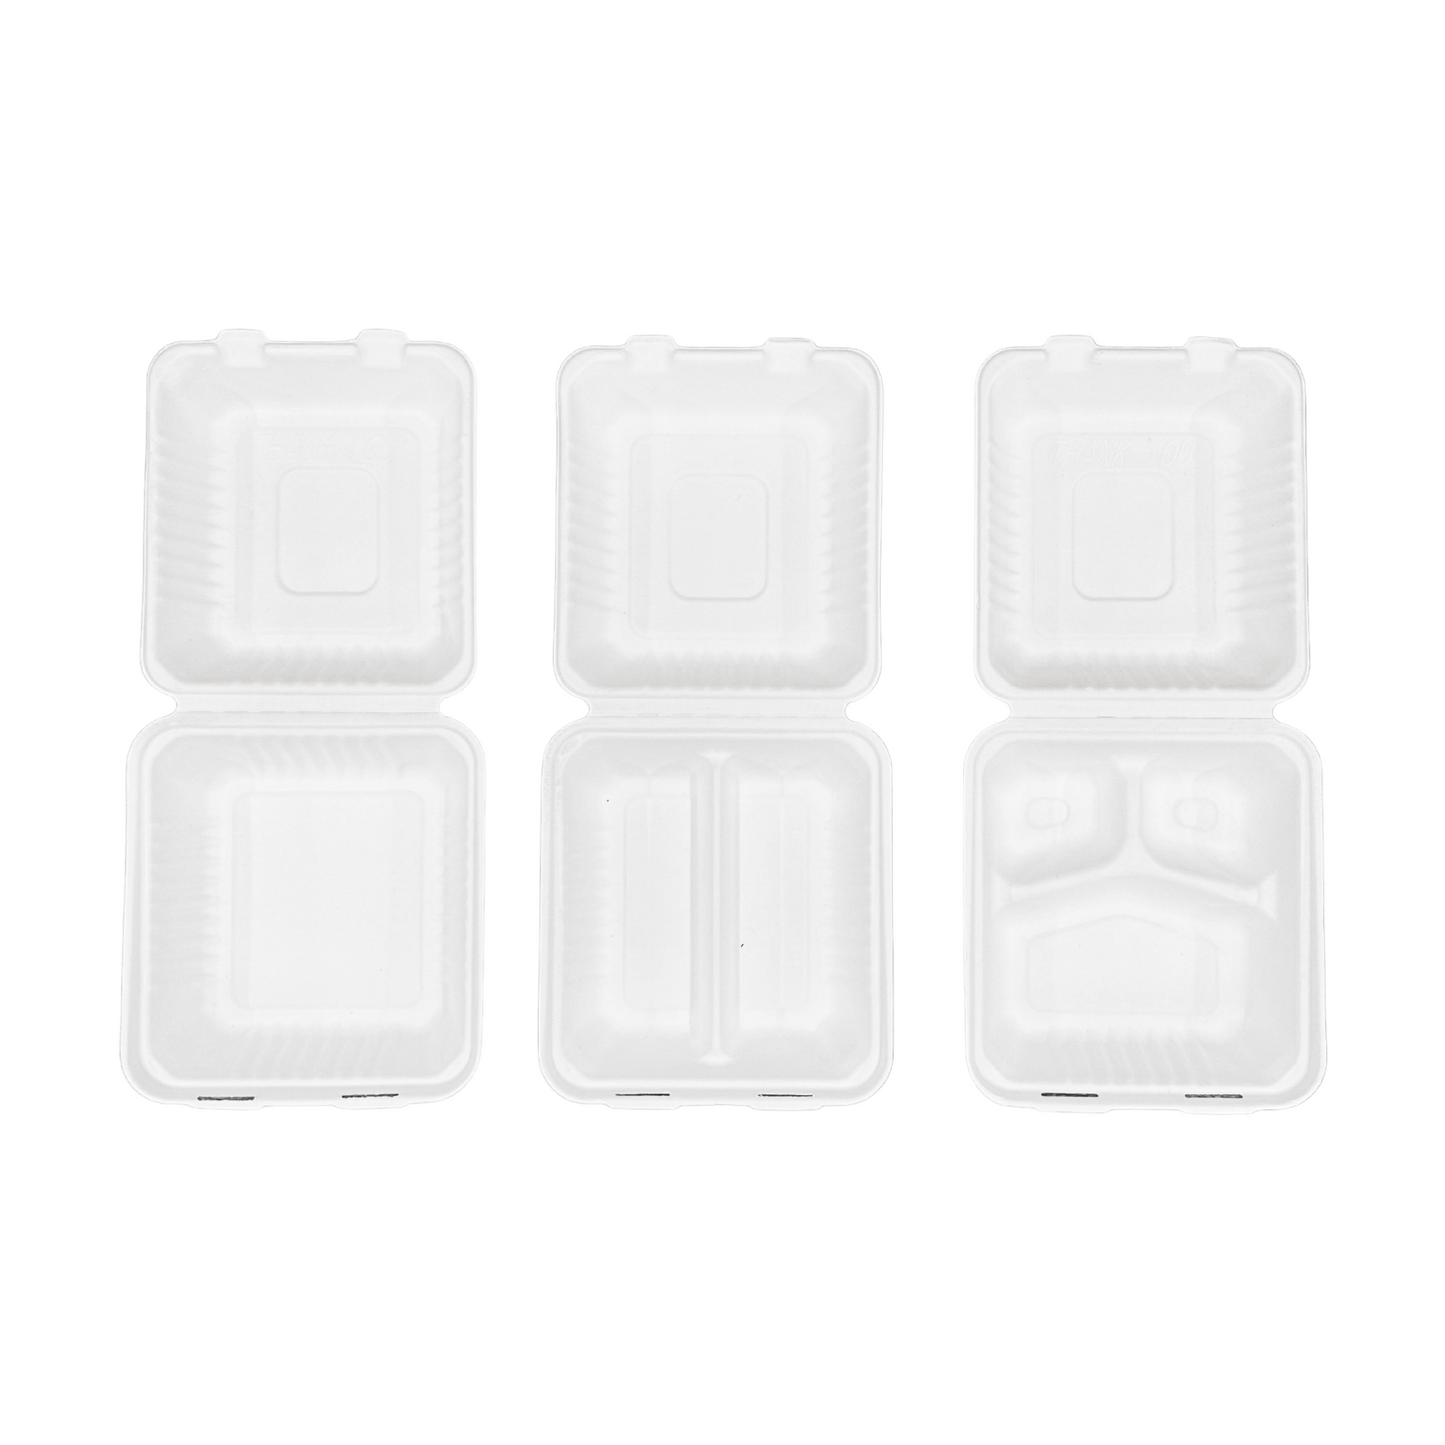 200 Pcs, 8x8x3'', 3-Compartment, Sugarcane Clamshell Food Container